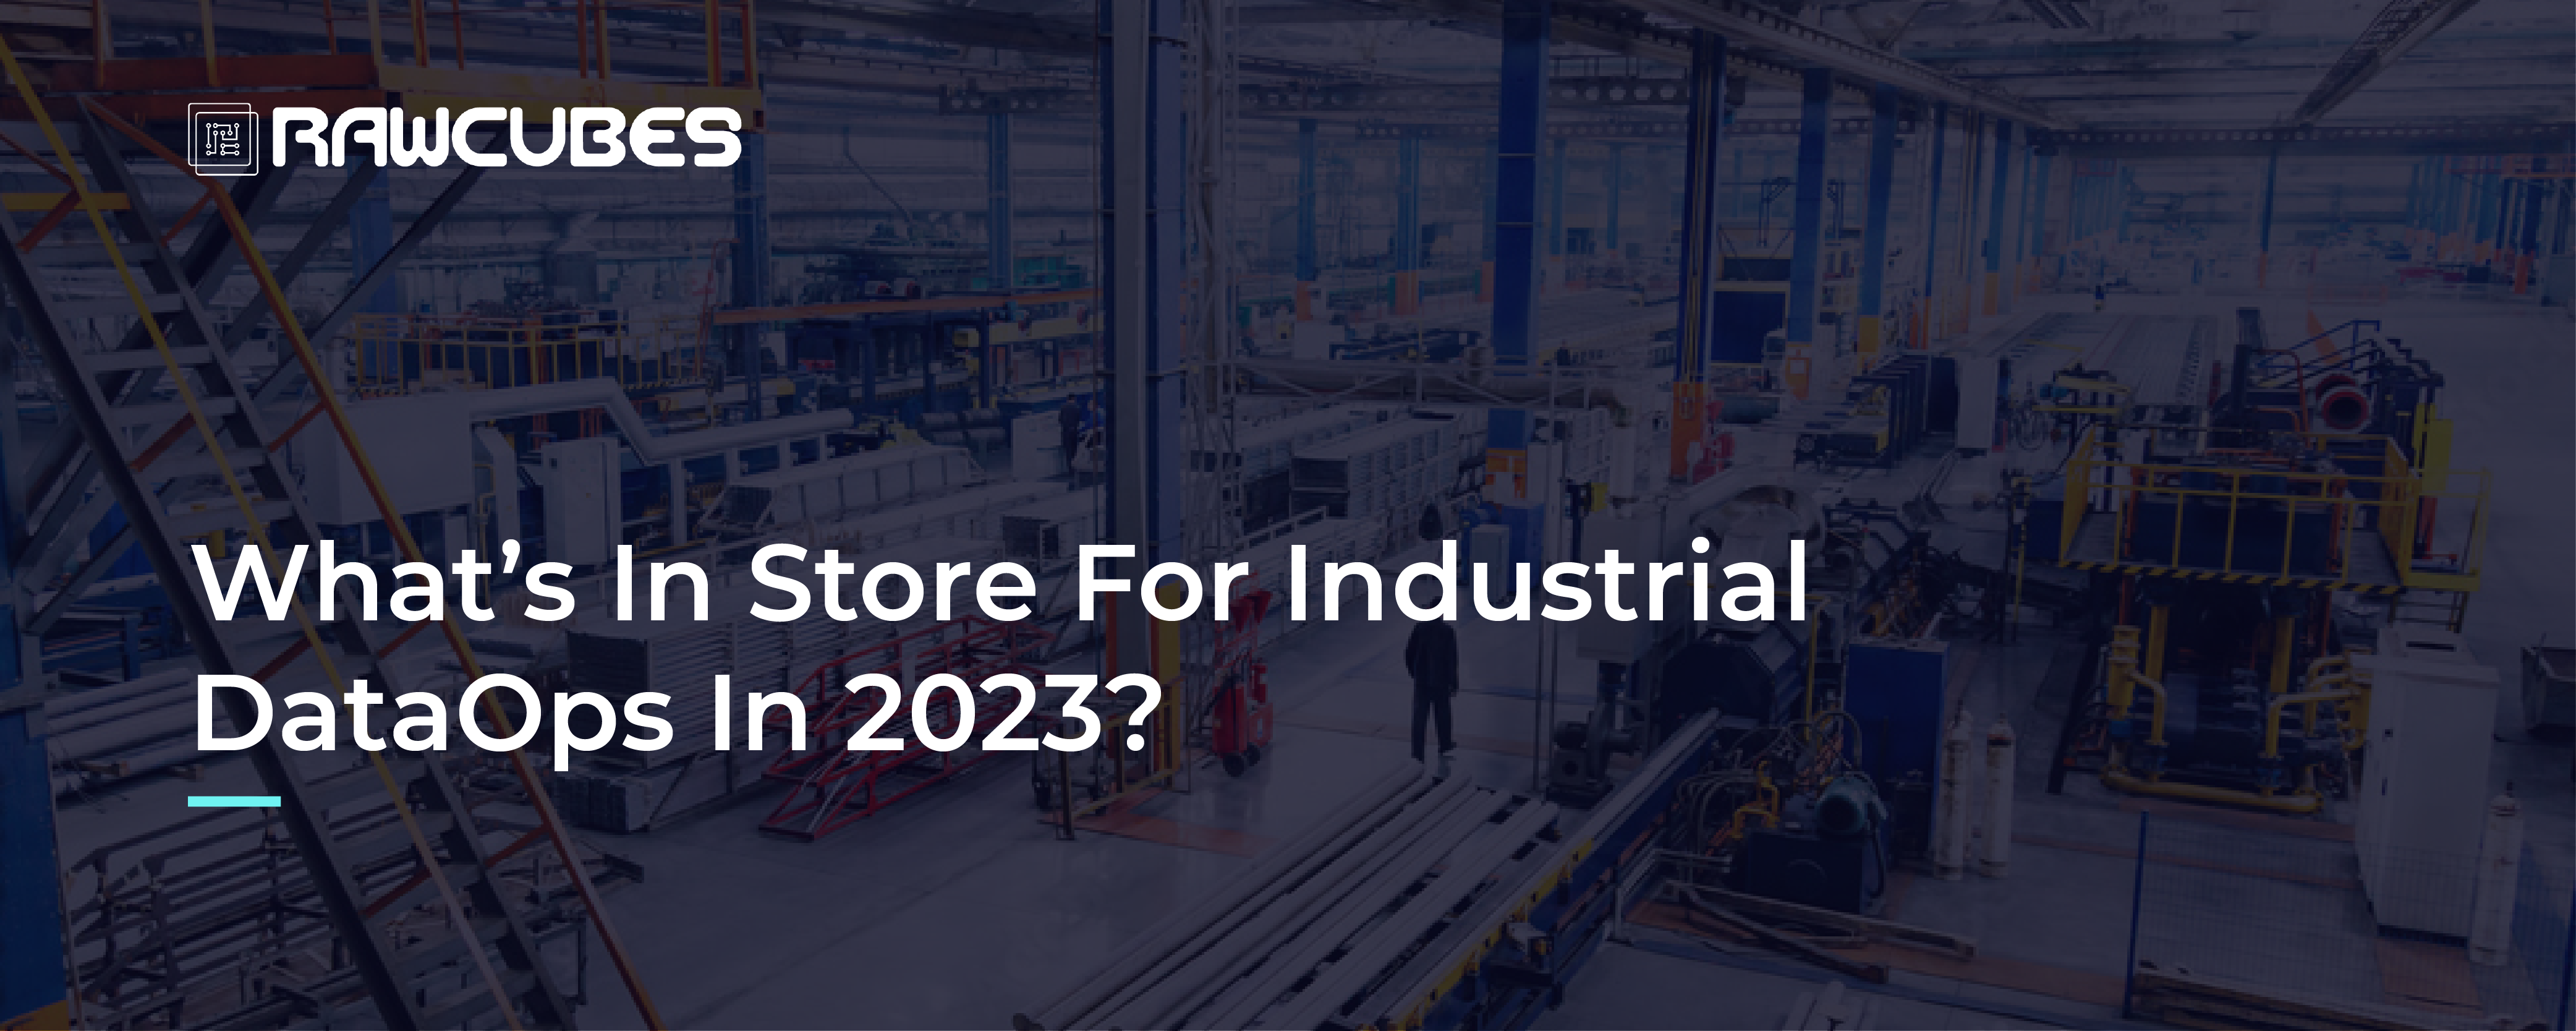 what is in store for industrial dataops in 2023